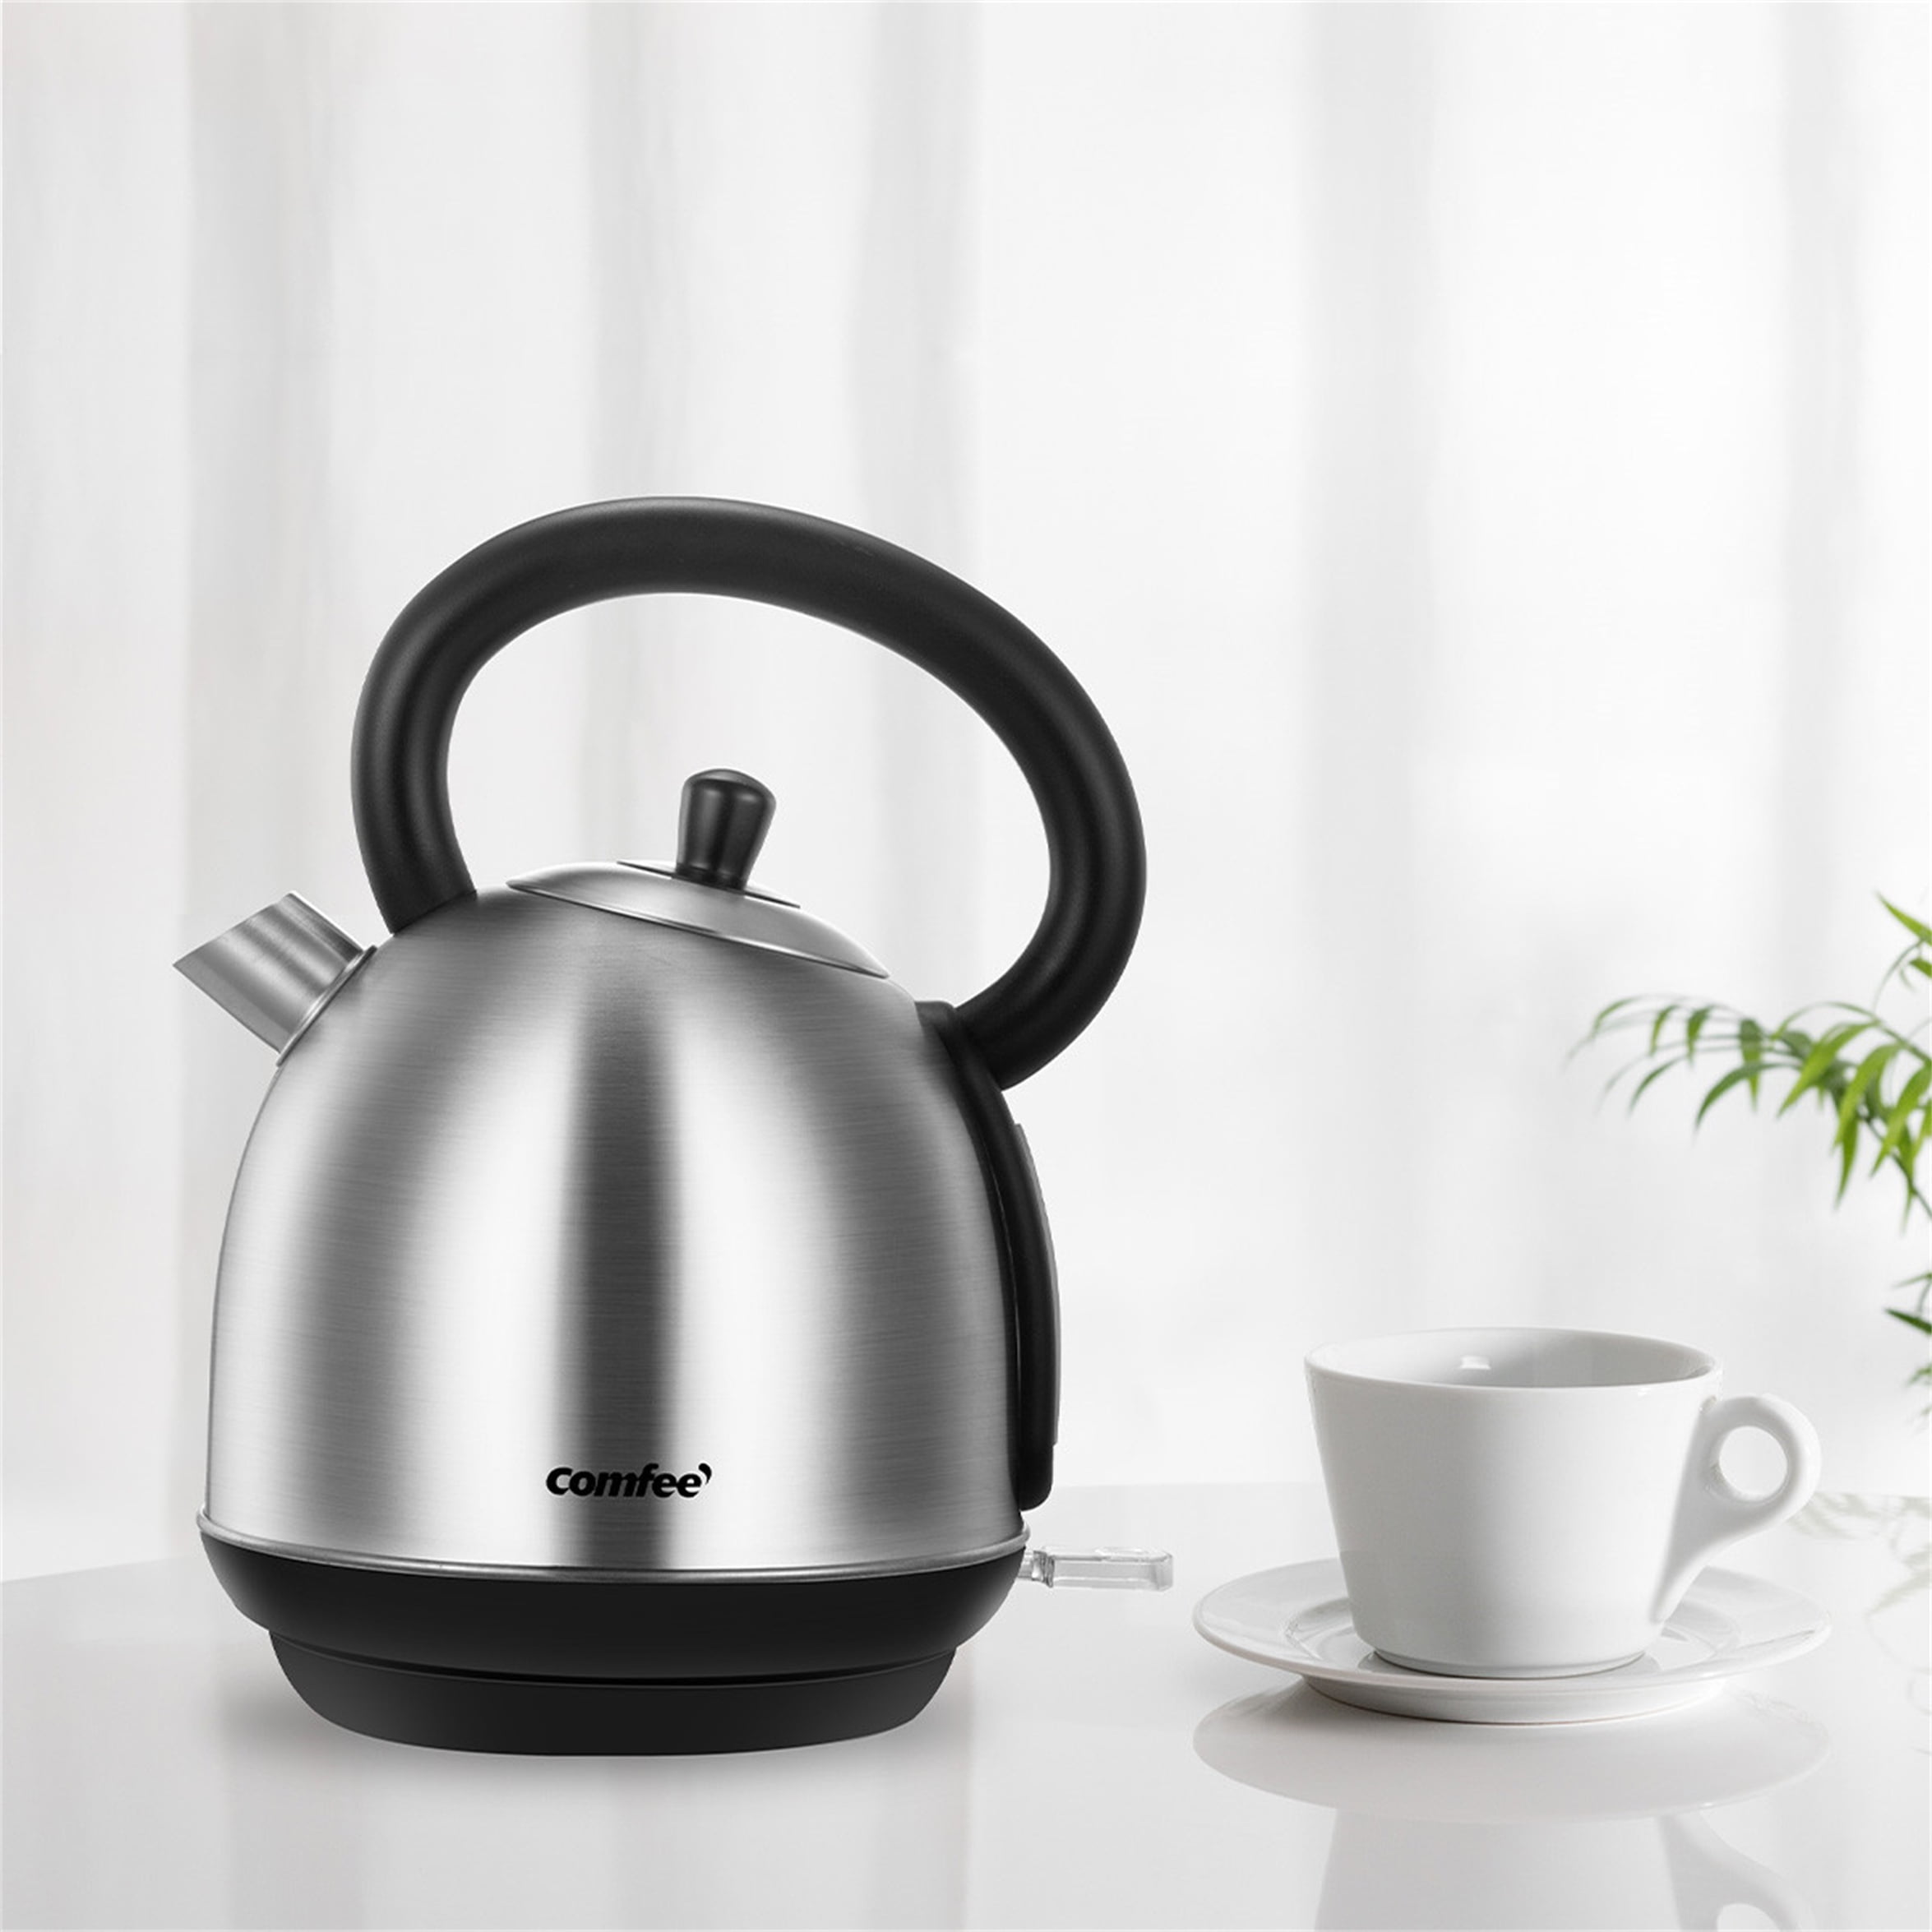 COMFEE' Stainless Steel Cordless Electric Kettle. 1500W Fast Boil with LED  Light, Auto Shut-Off and Boil-Dry Protection. 1.7 Liter